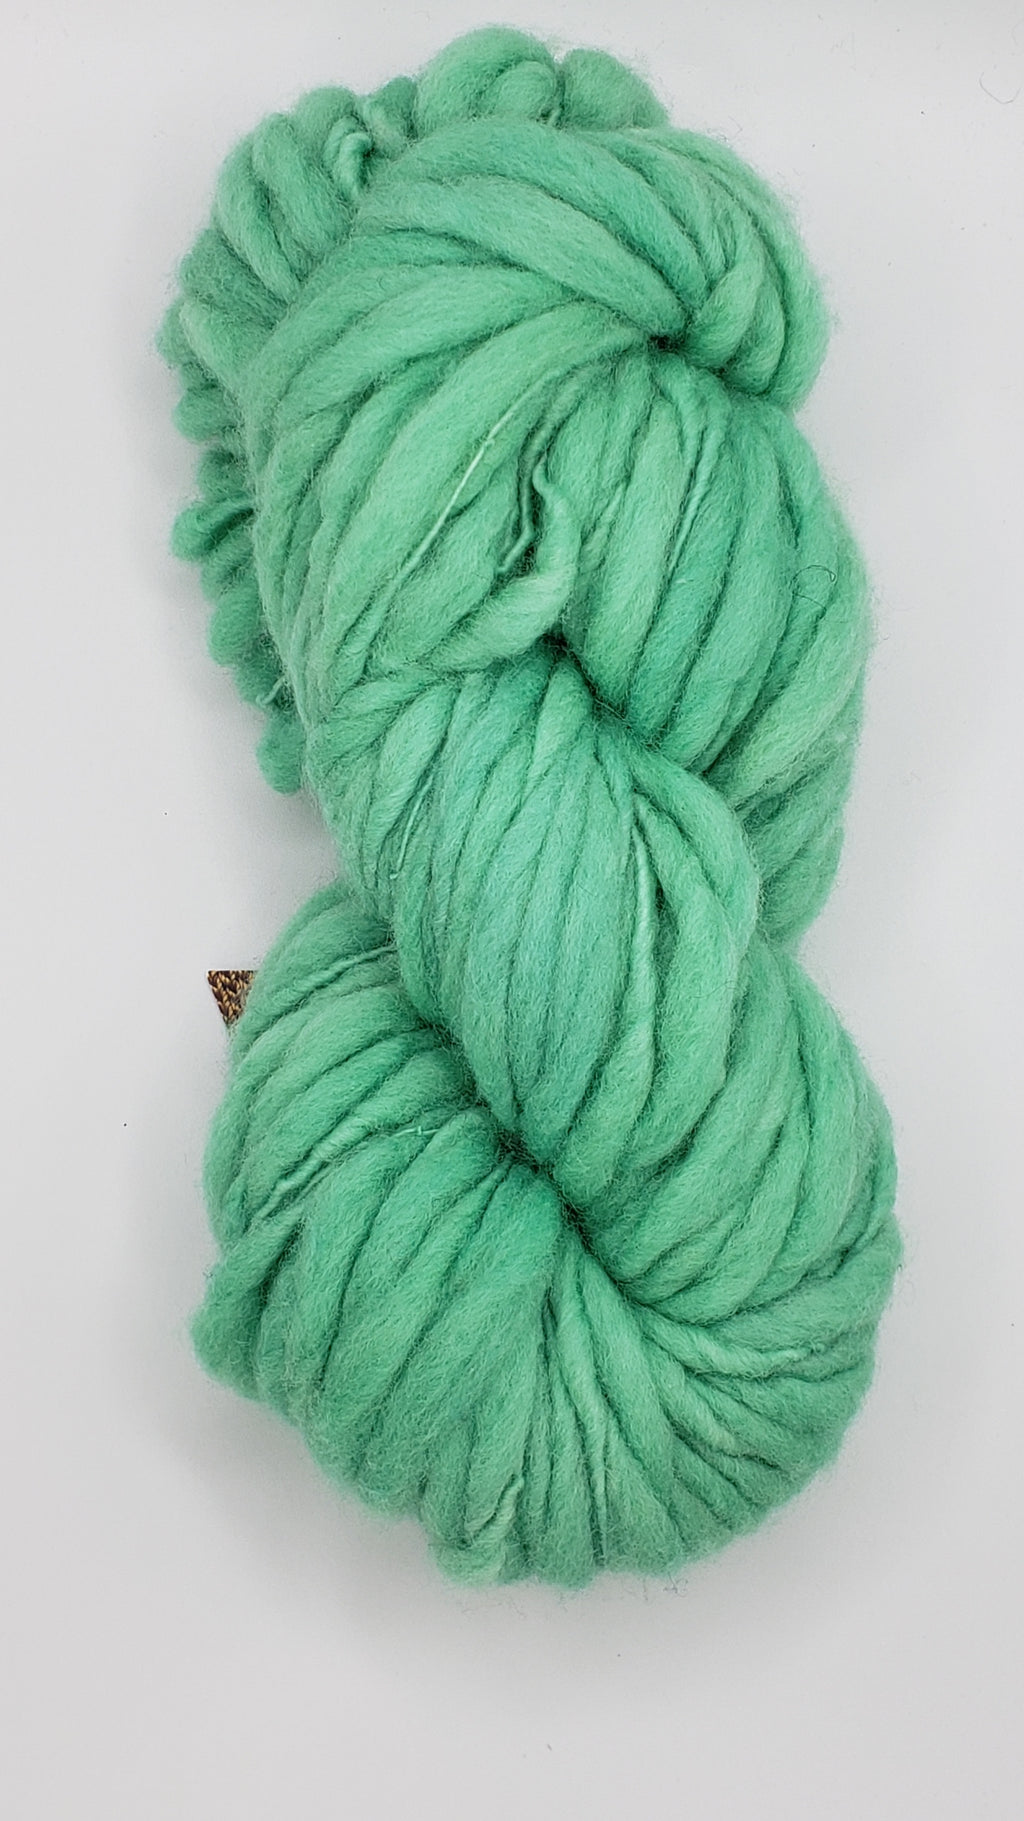 Slubby - WINTER GREEN -  OOAK Merino/Blue Face Leicester - Hand Dyed Textured Yarn Thick and Thin